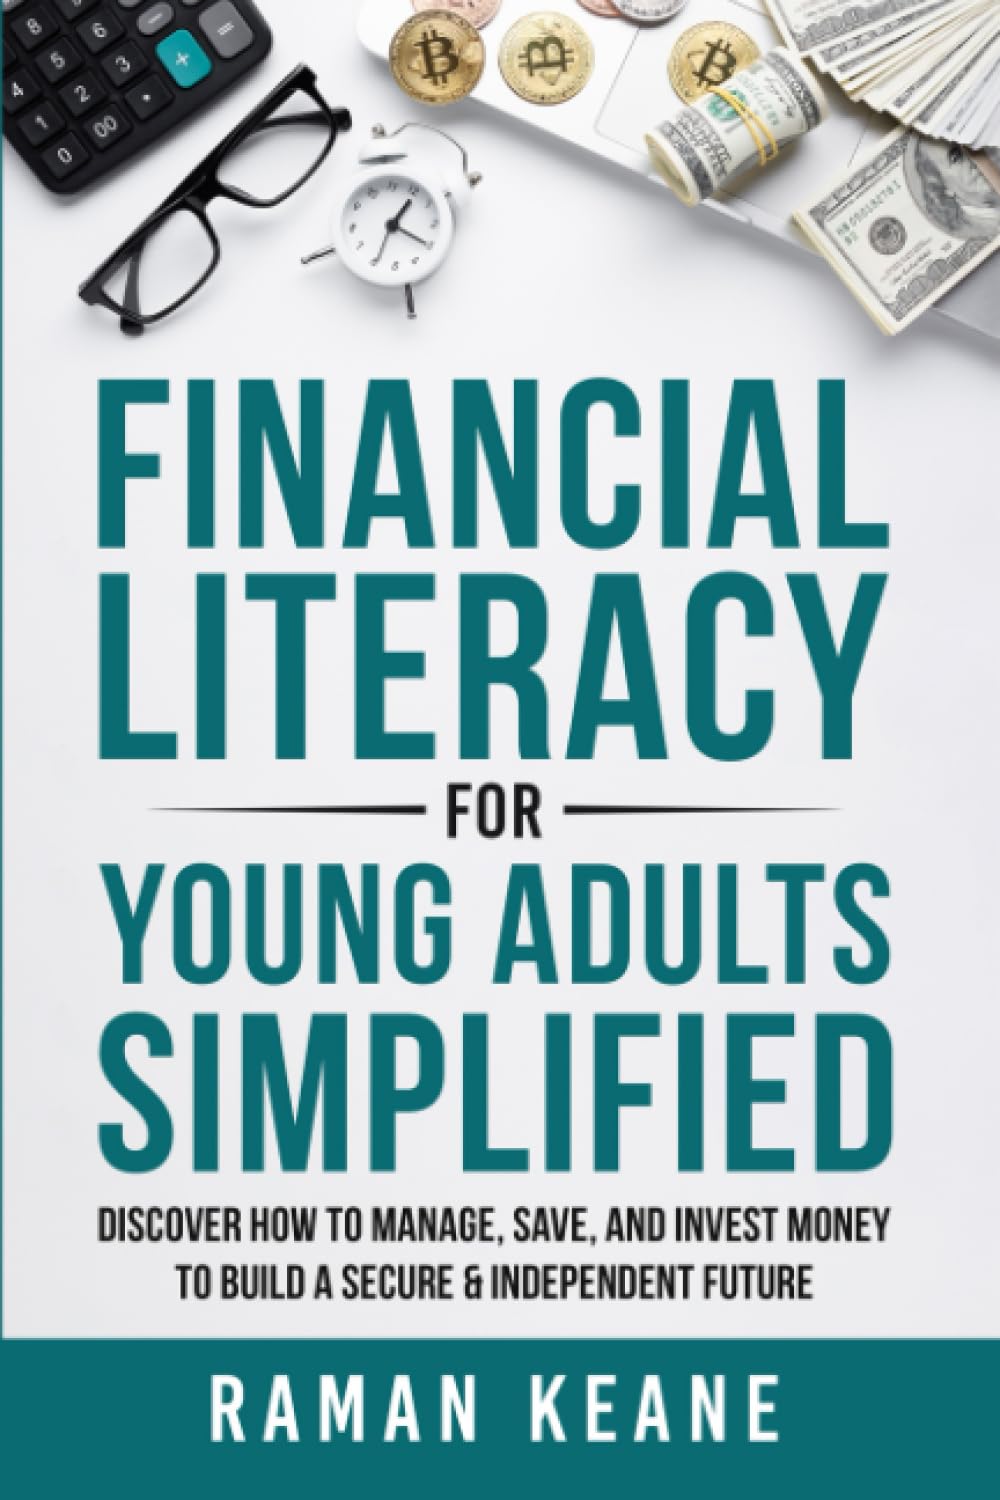 Financial Literacy for Young Adults Simplified: Discover How to Manage, Save, and Invest Money to Build a Secure & Independent Future